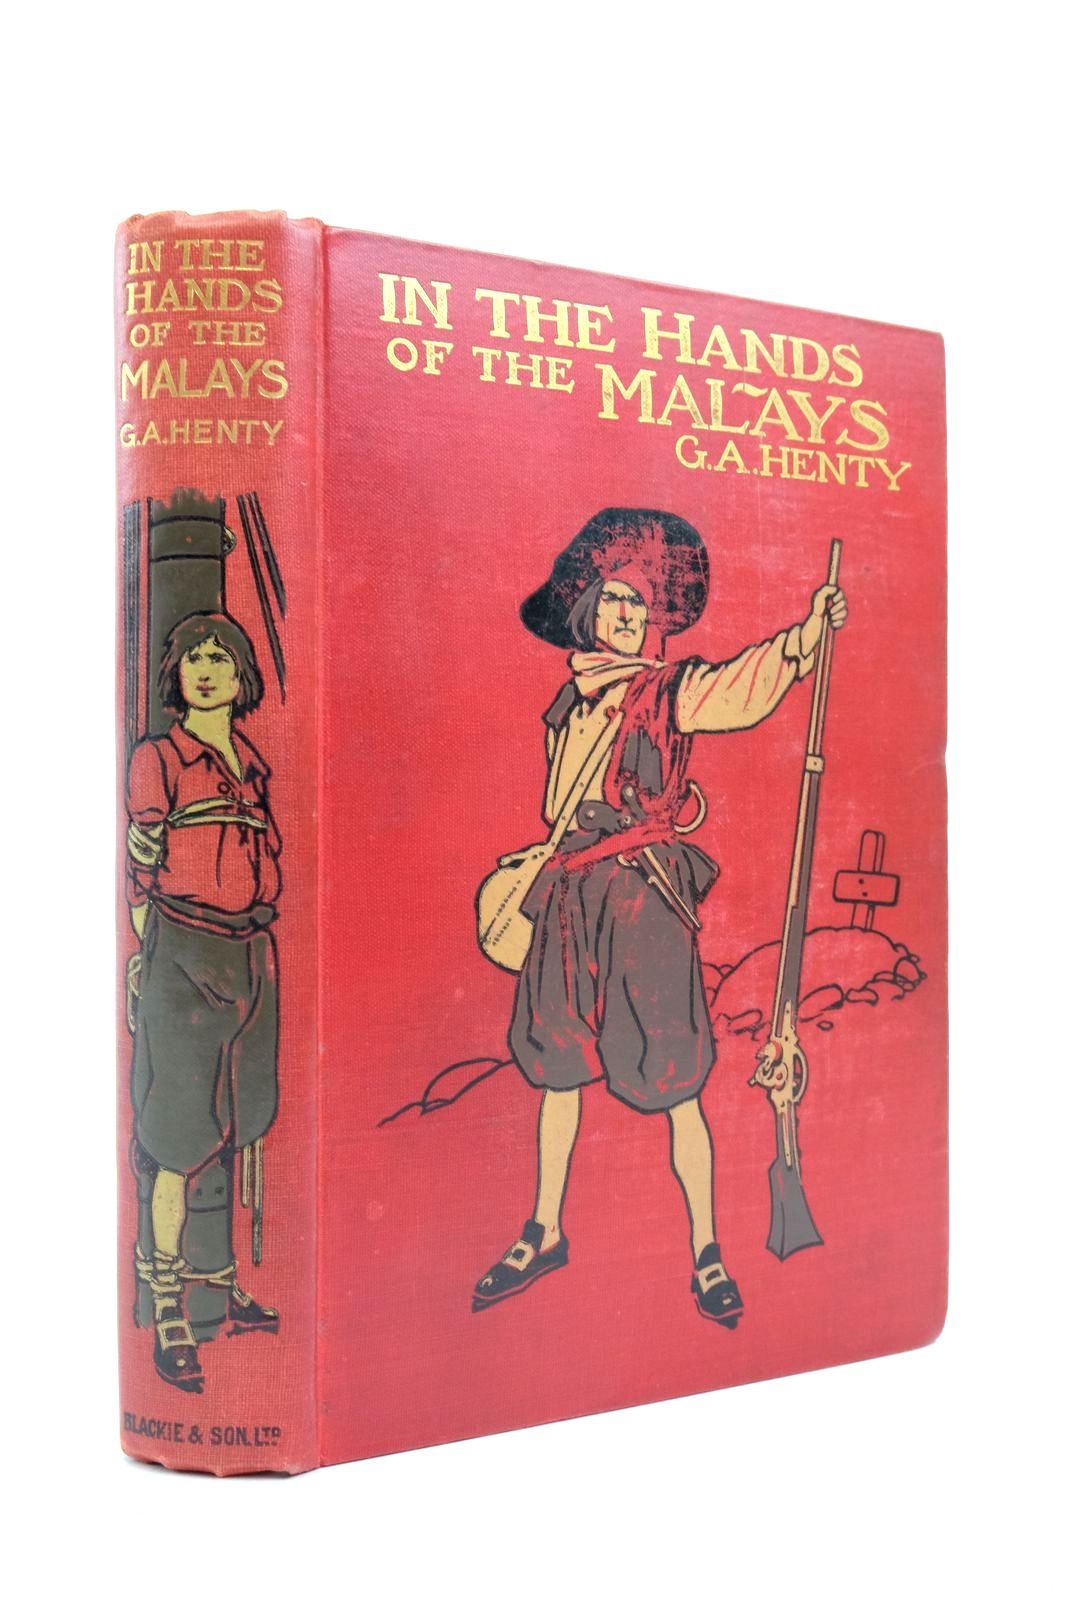 Photo of IN THE HANDS OF THE MALAYS written by Henty, G.A. illustrated by Jellicoe, J. published by Blackie &amp; Son Ltd. (STOCK CODE: 2138160)  for sale by Stella & Rose's Books